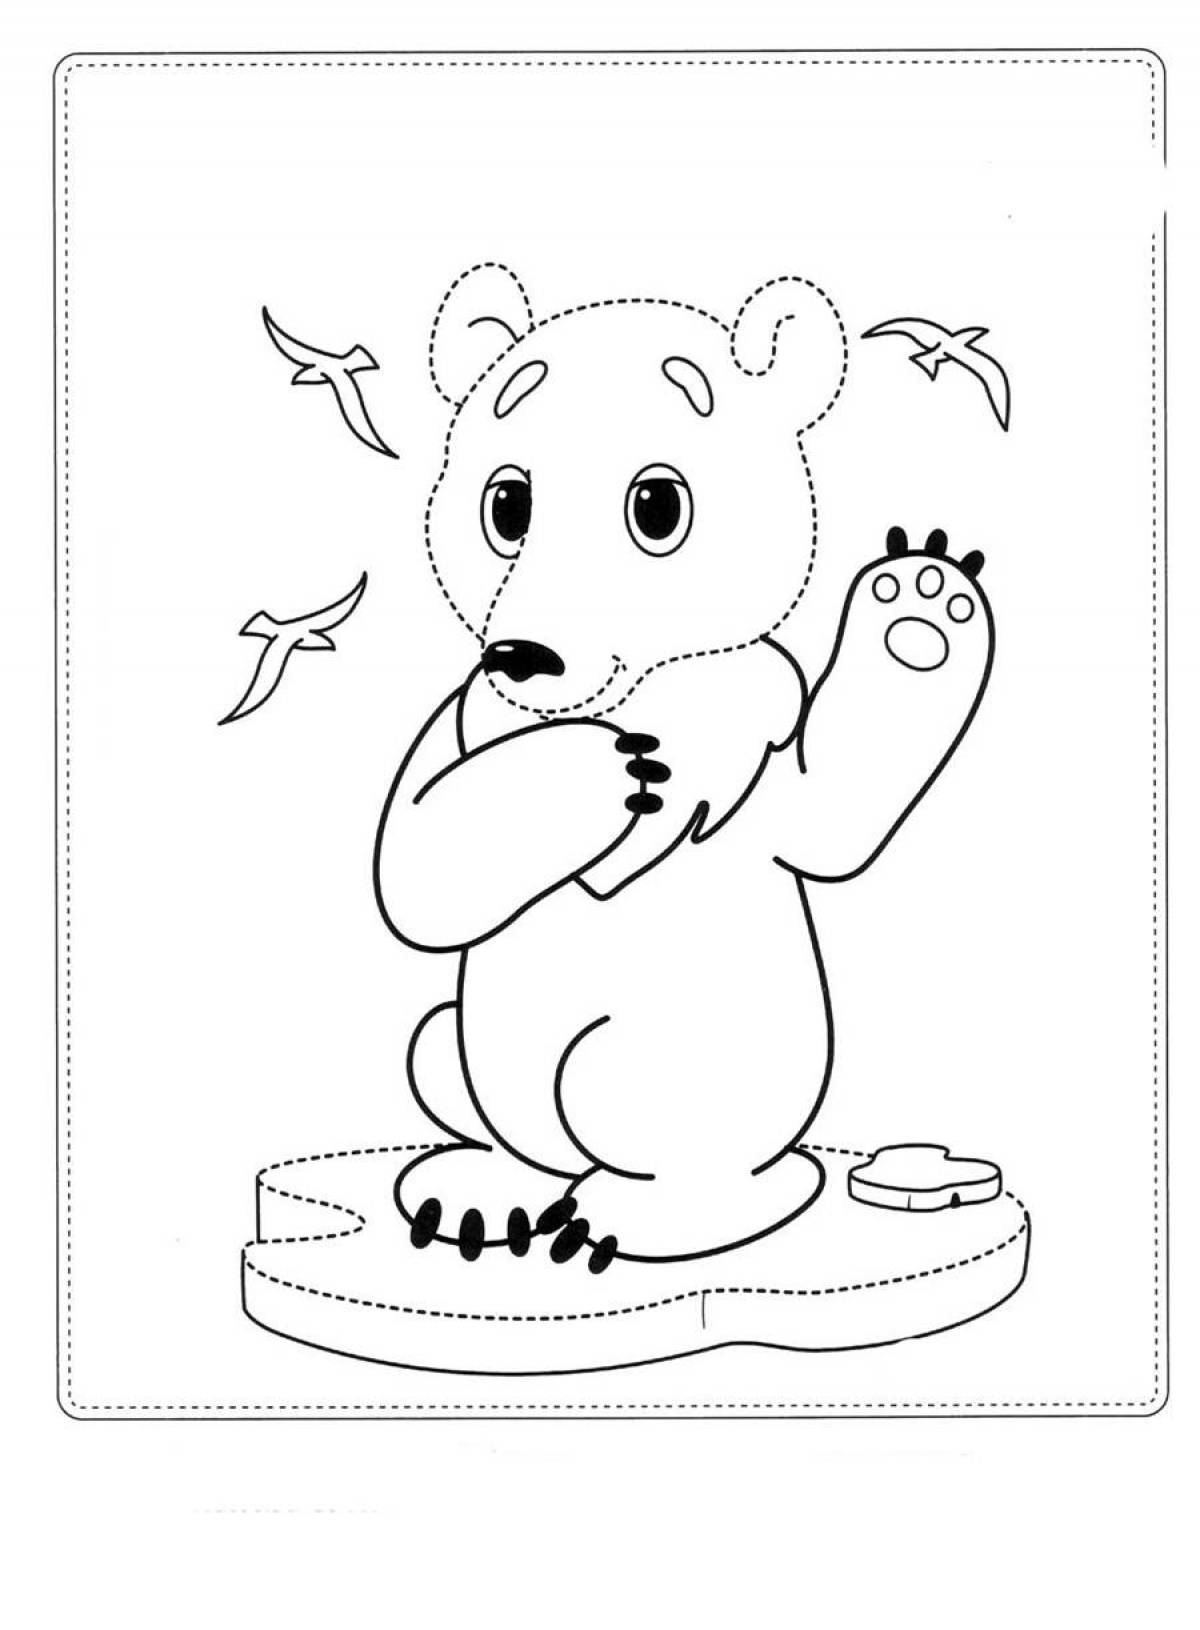 Attractive umka coloring book for kids